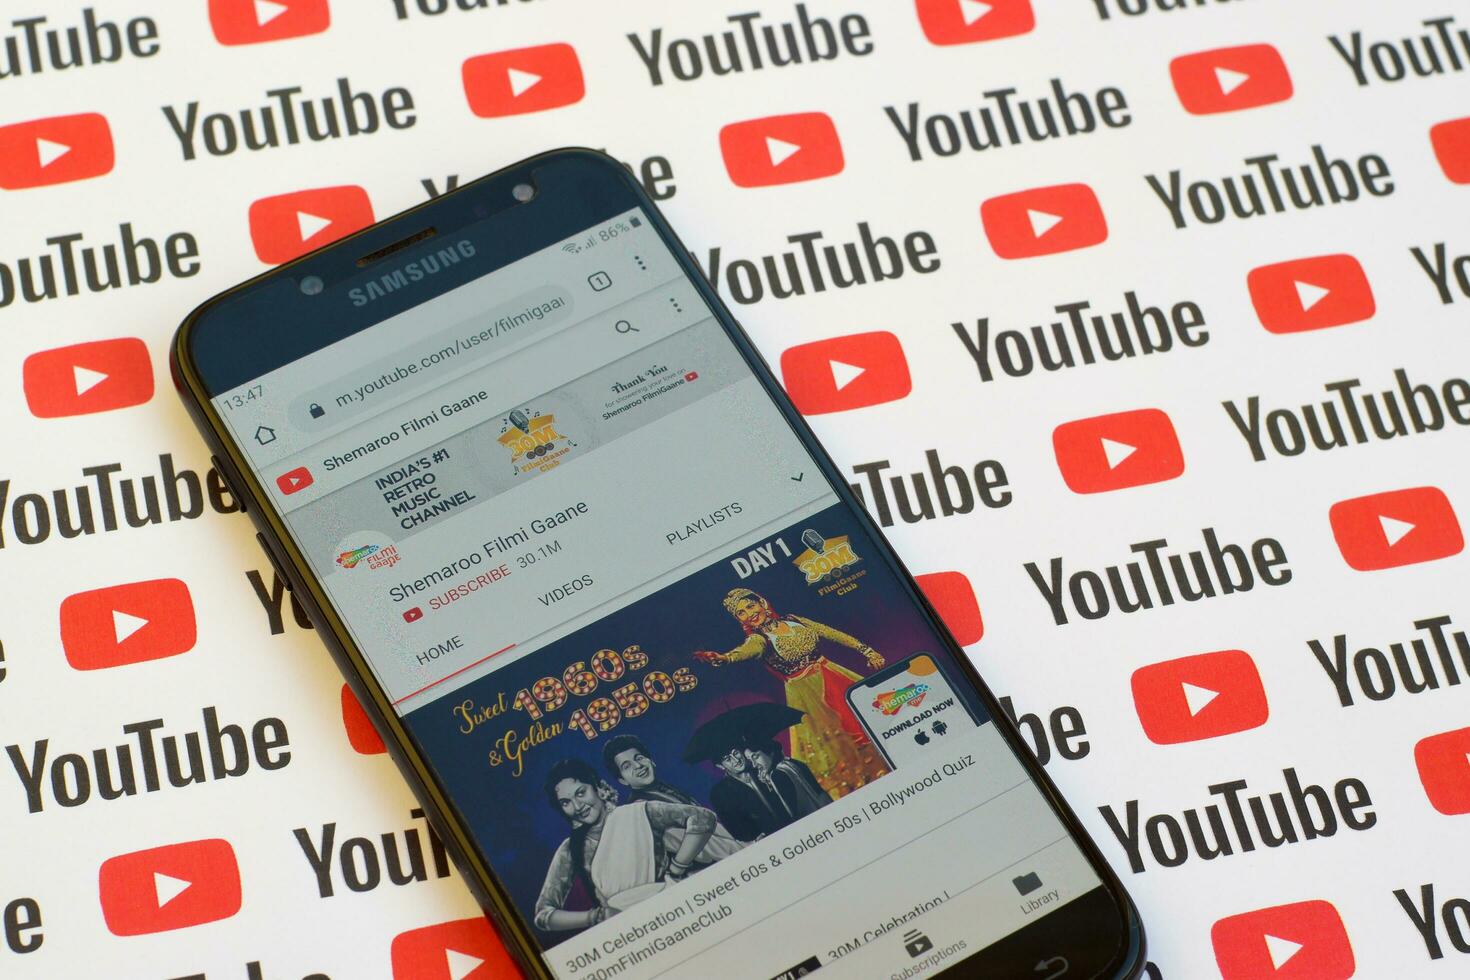 Shemaroo Filmi Gaane official youtube channel on smartphone screen on paper youtube background. photo